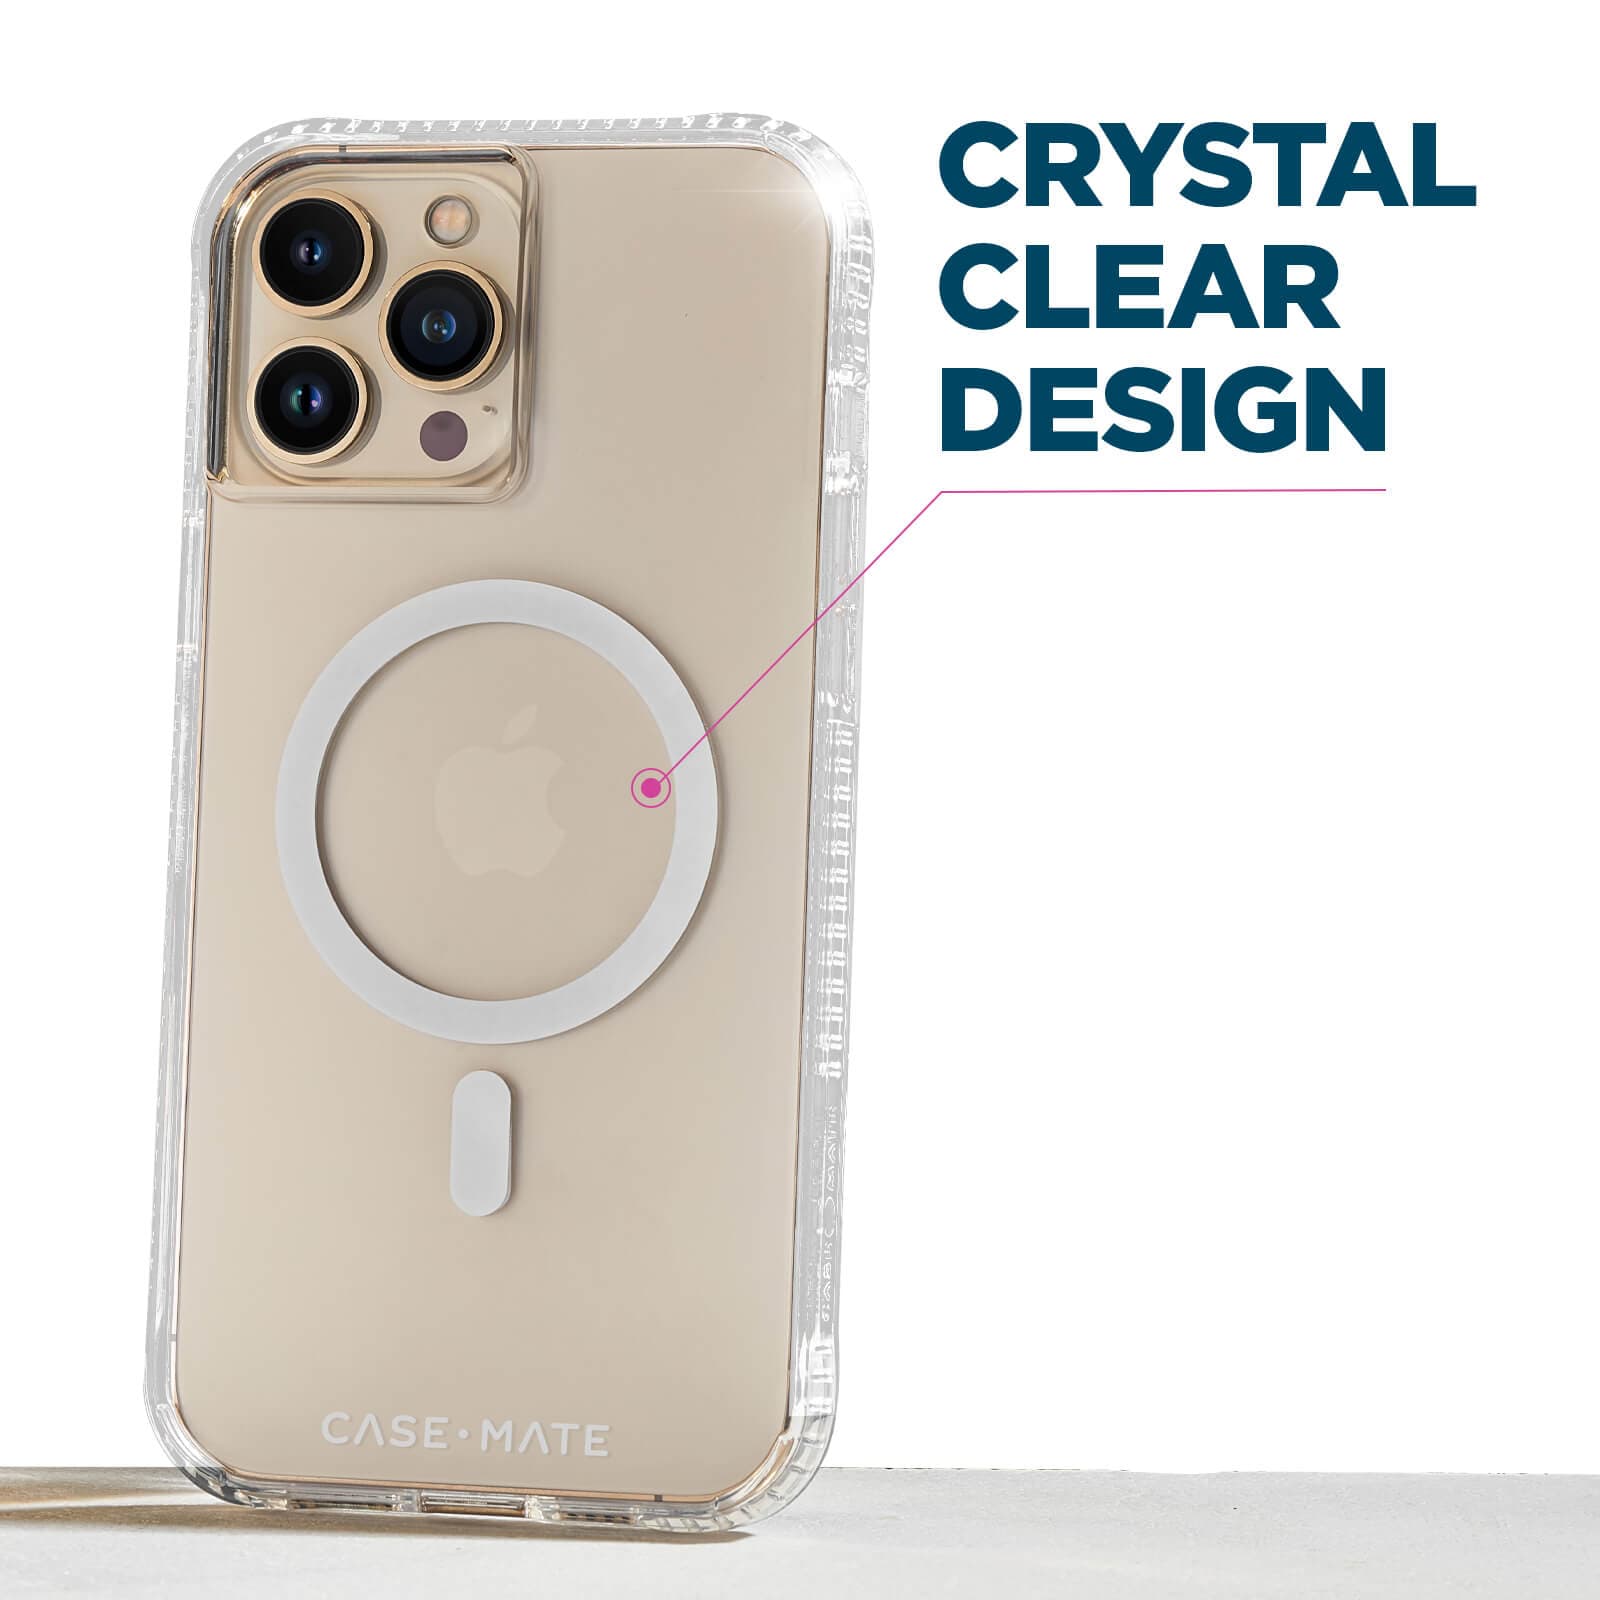 Crystal clear design. color::Clear